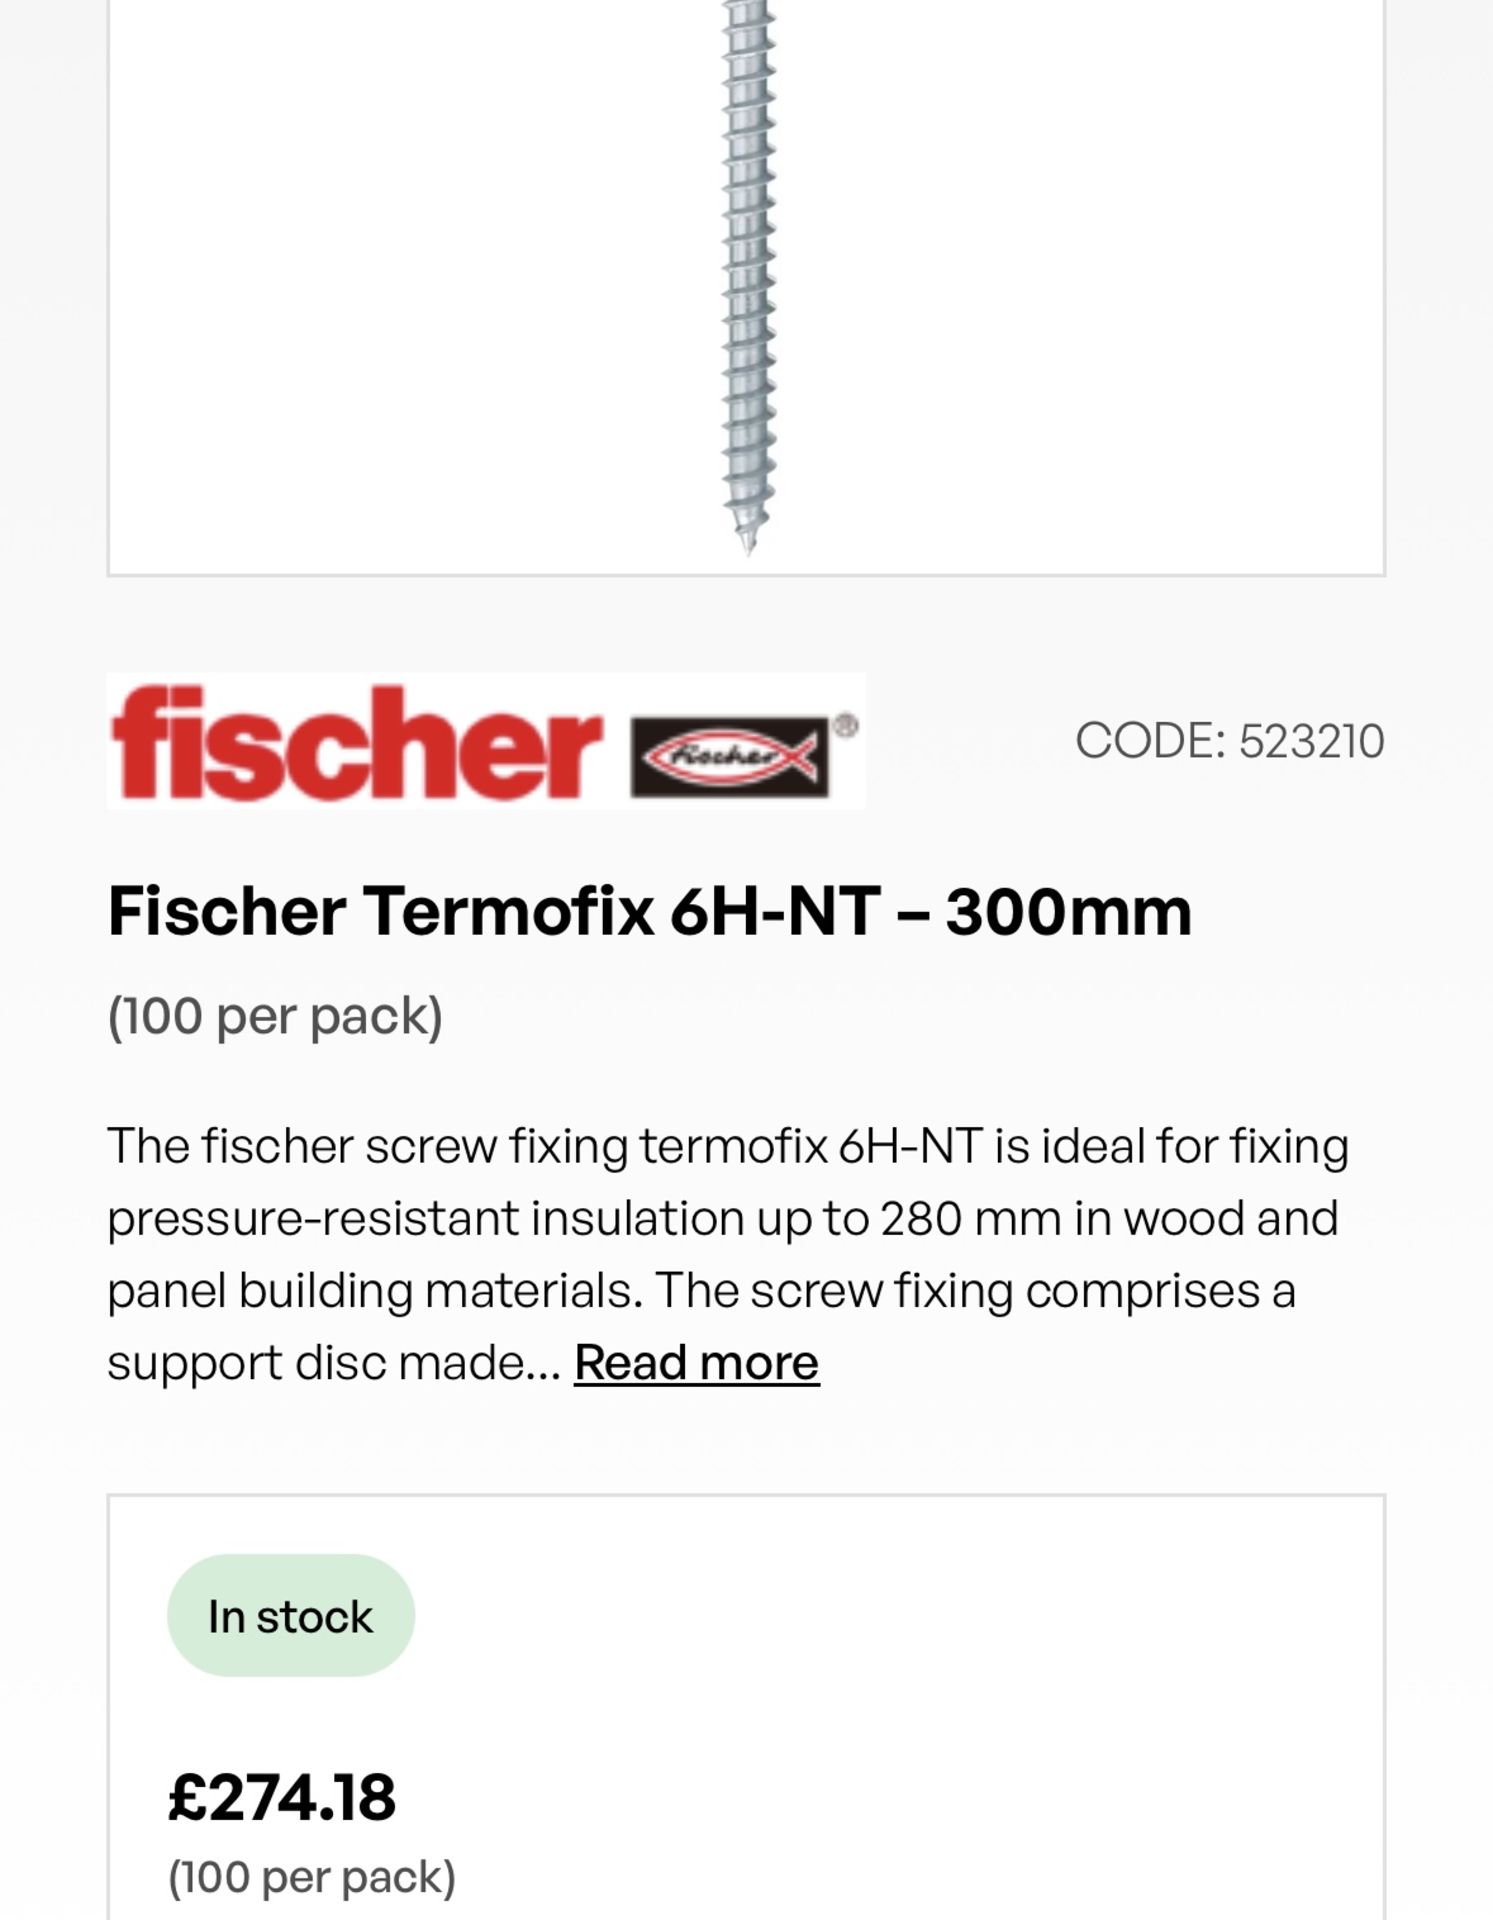 2 BOXES FISCHER THERMOFIX 6 H-NT 300MM 100 IN BOX INSULATION